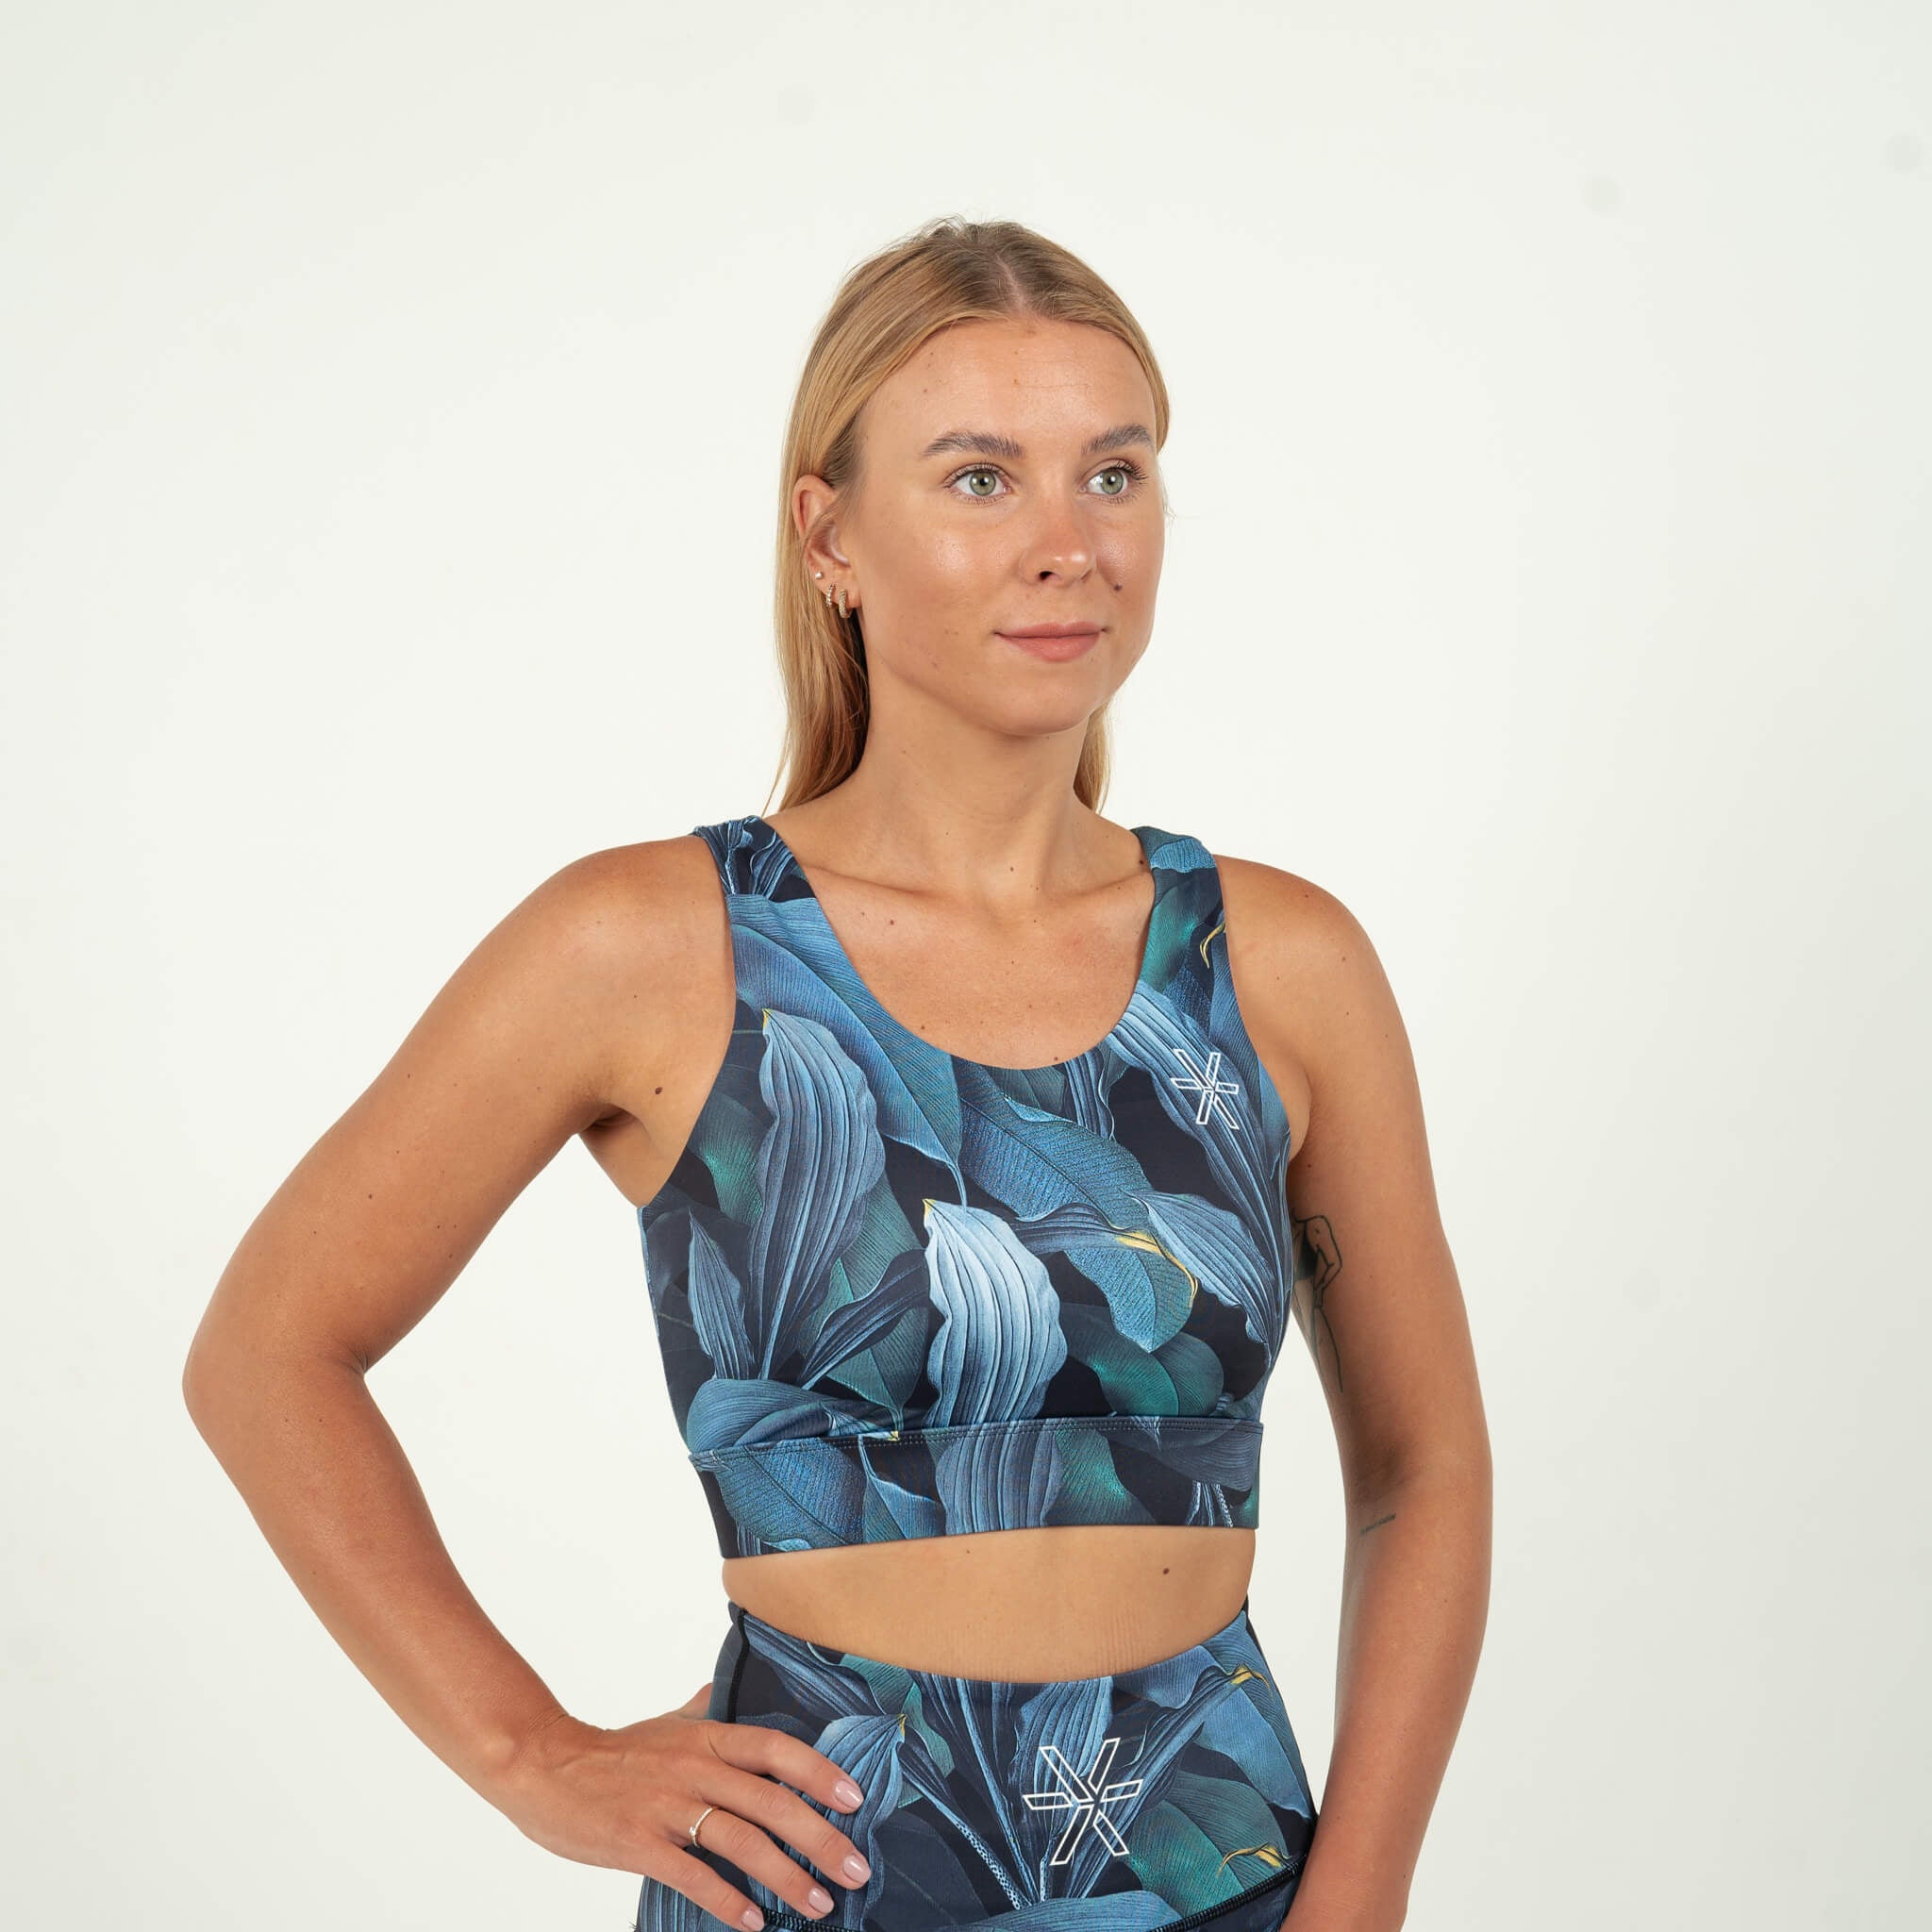 Running Bare Say My Name Sports Bra Womens - Buy Online - Ph: 1800-370-766  - AfterPay & ZipPay Available!